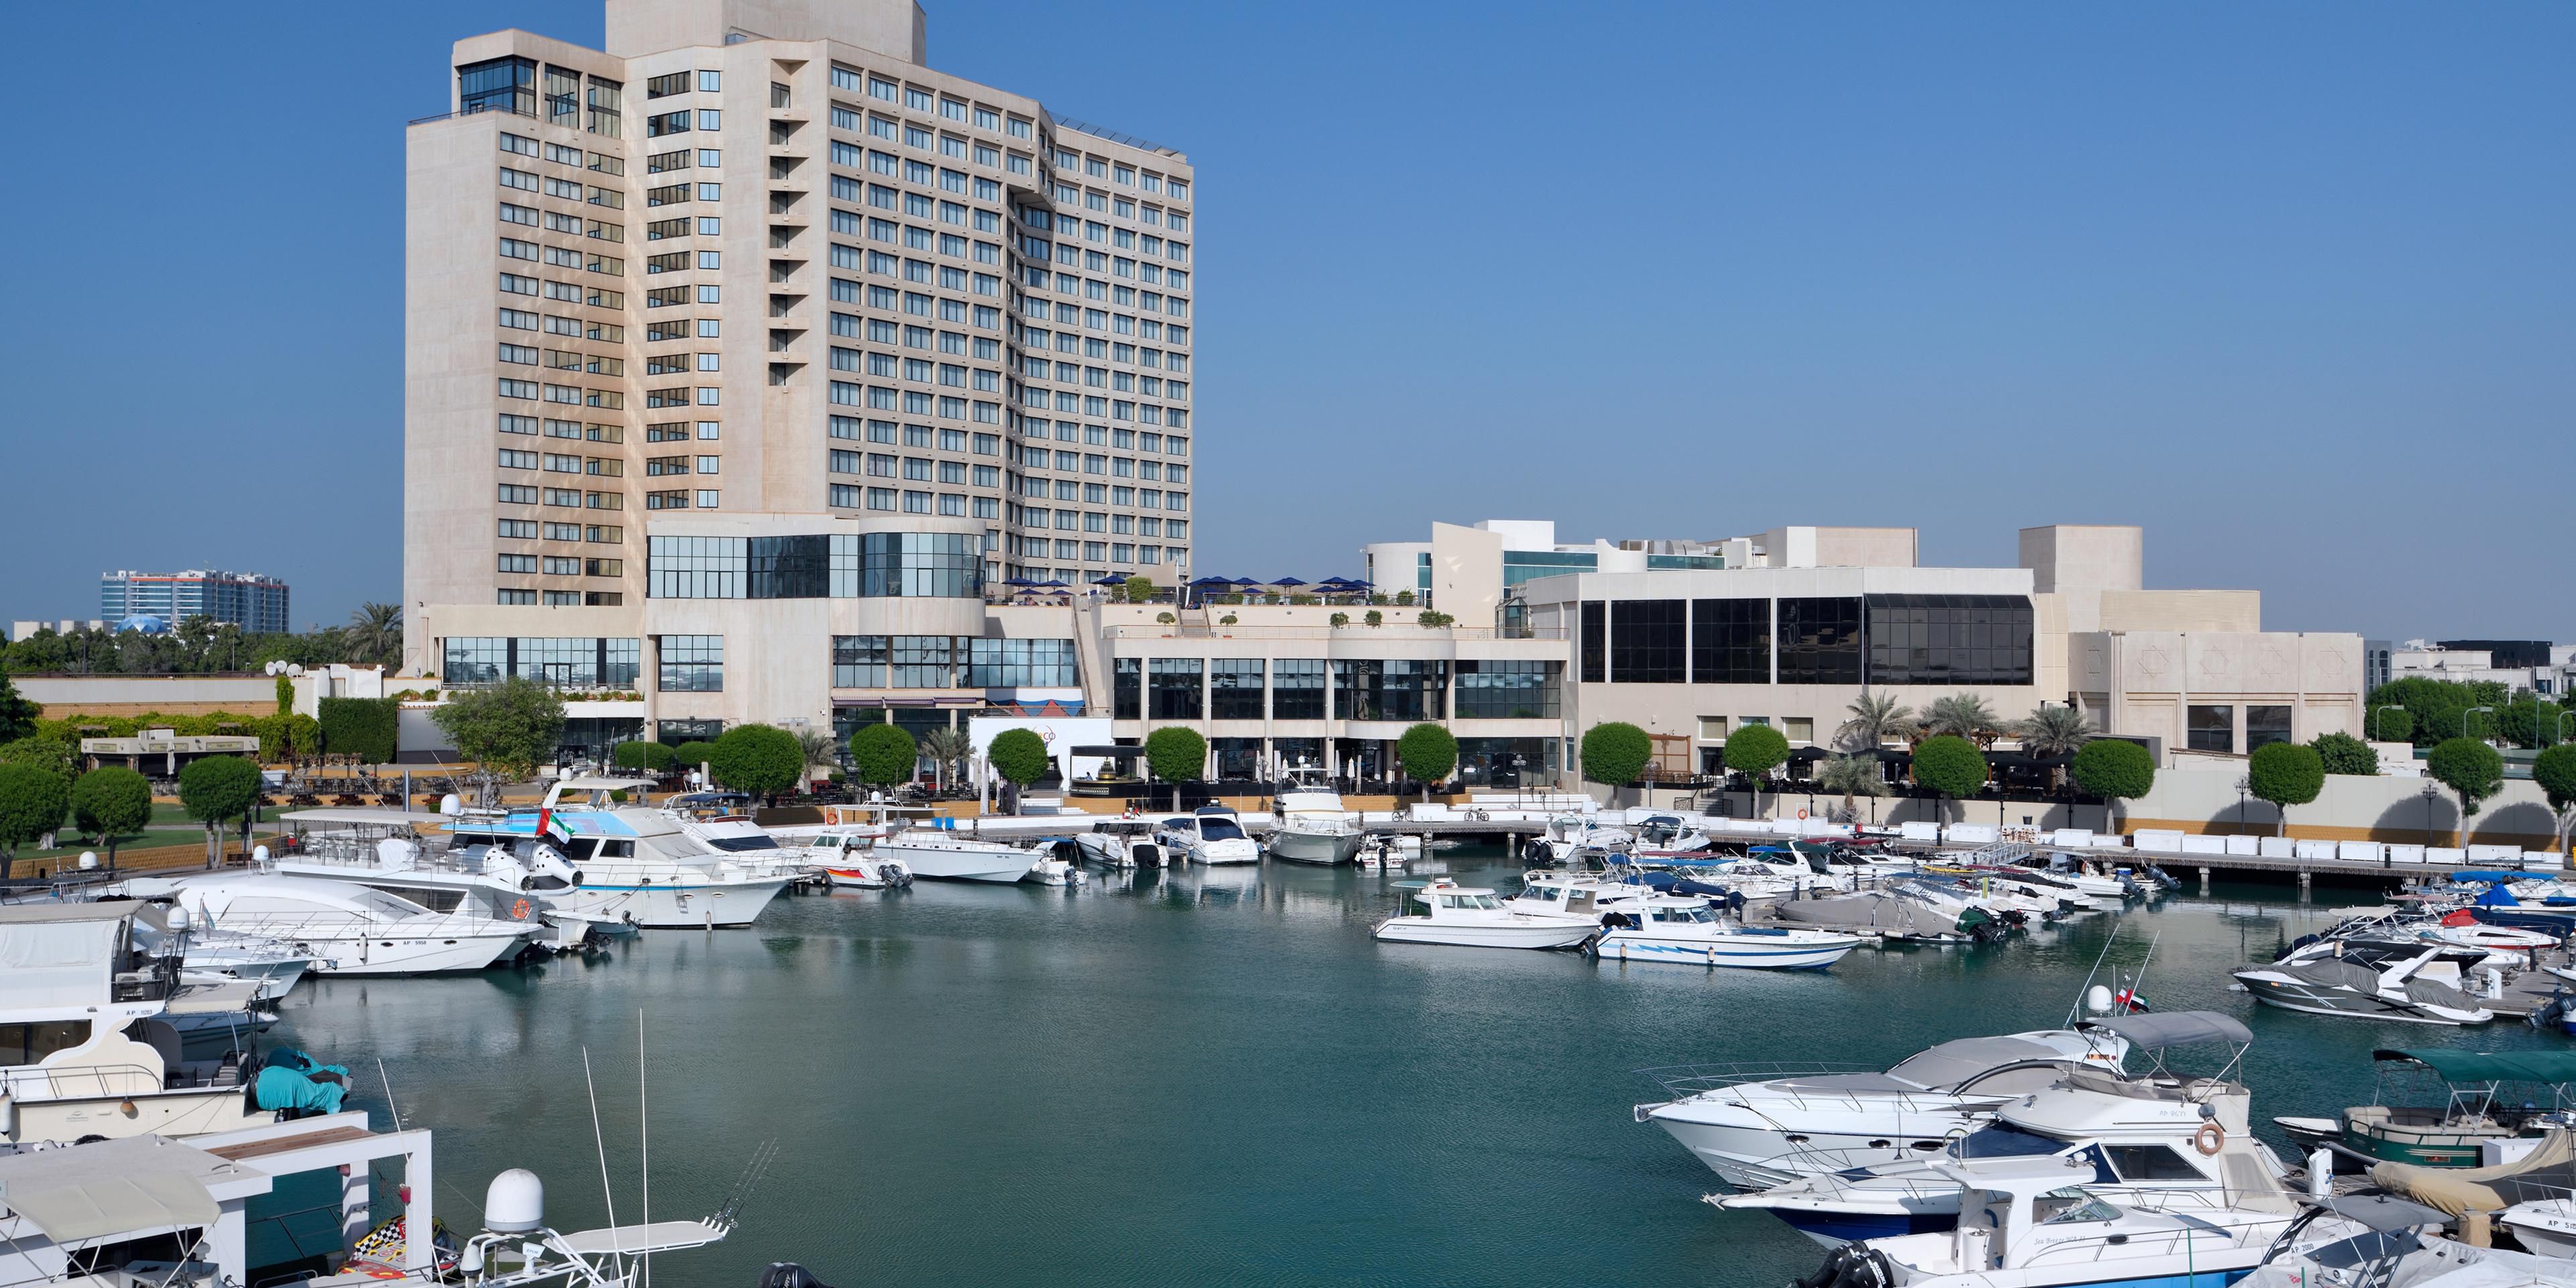 The InterContinental Marina is part of this amazing facilities with berthing spaces for 183 yachts up to 65 feet in size. Join this exclusive marina and enjoy a wide range of benefits.